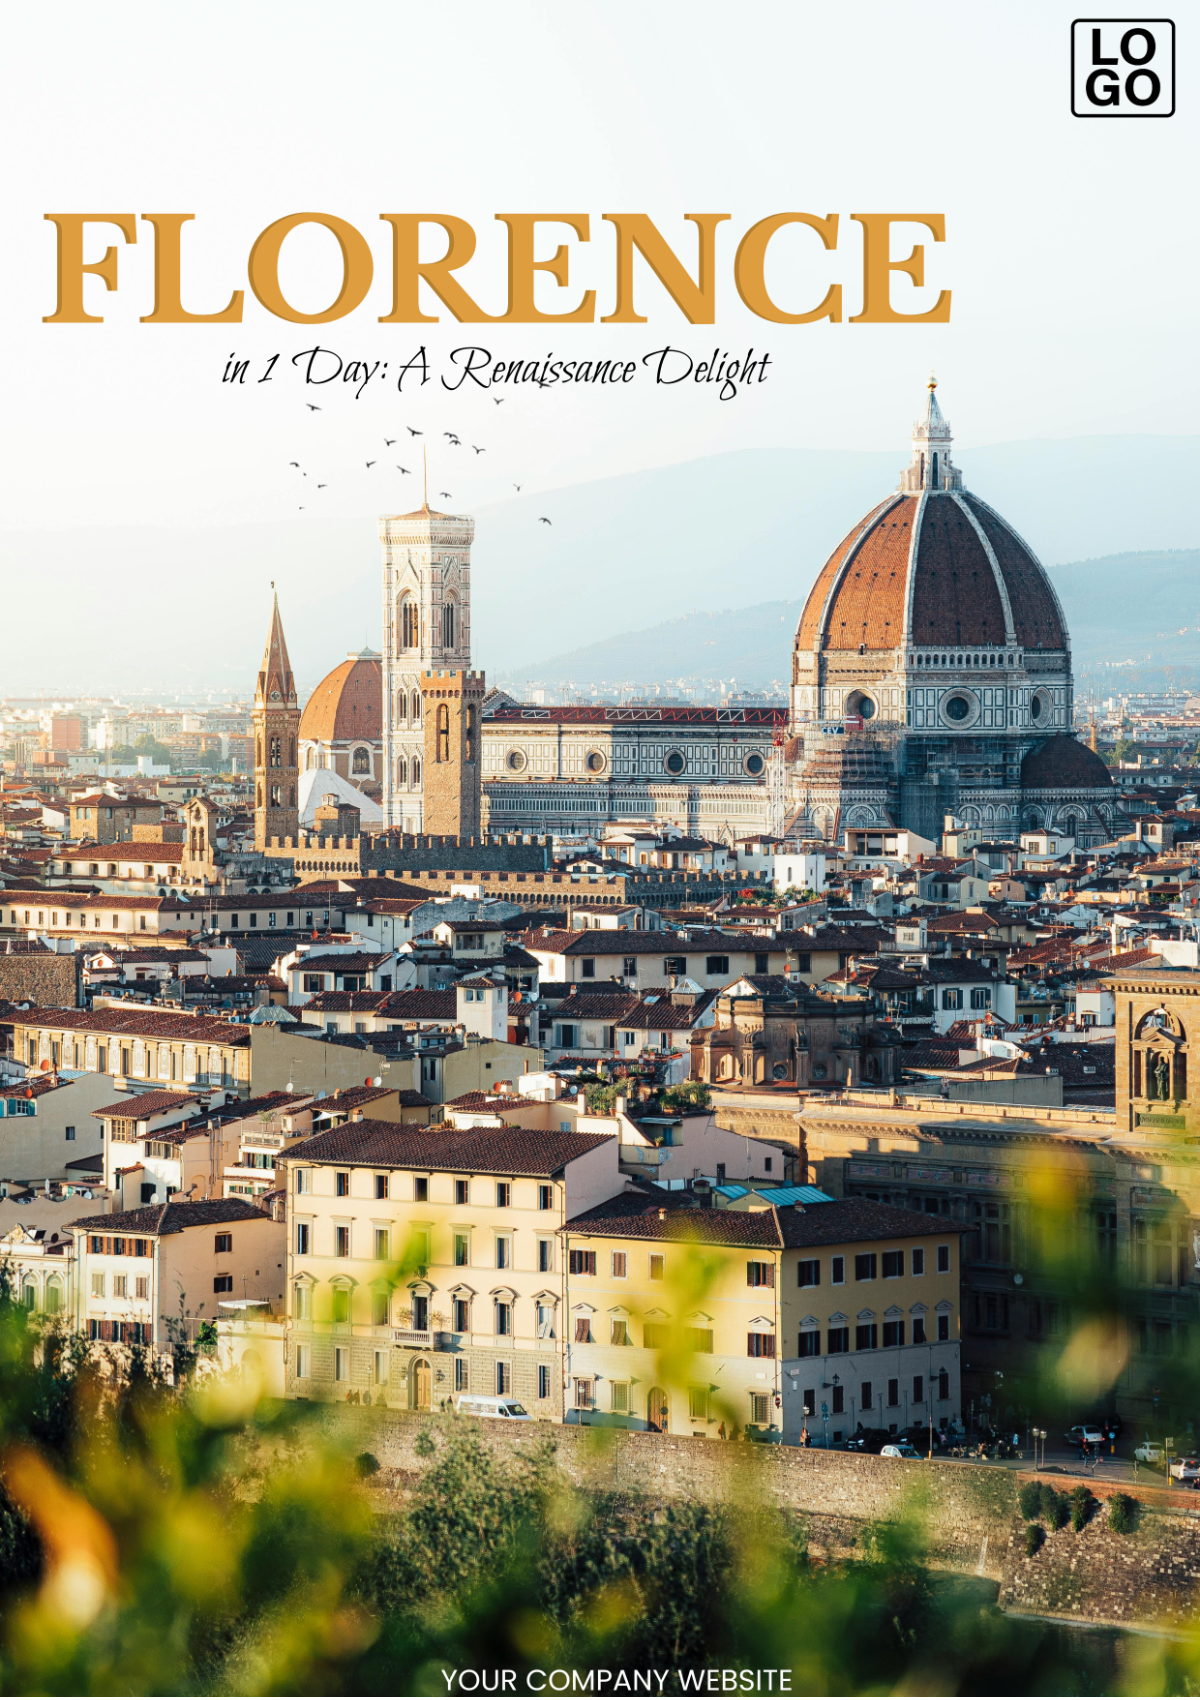 Free 1 Day Florence Itinerary Template